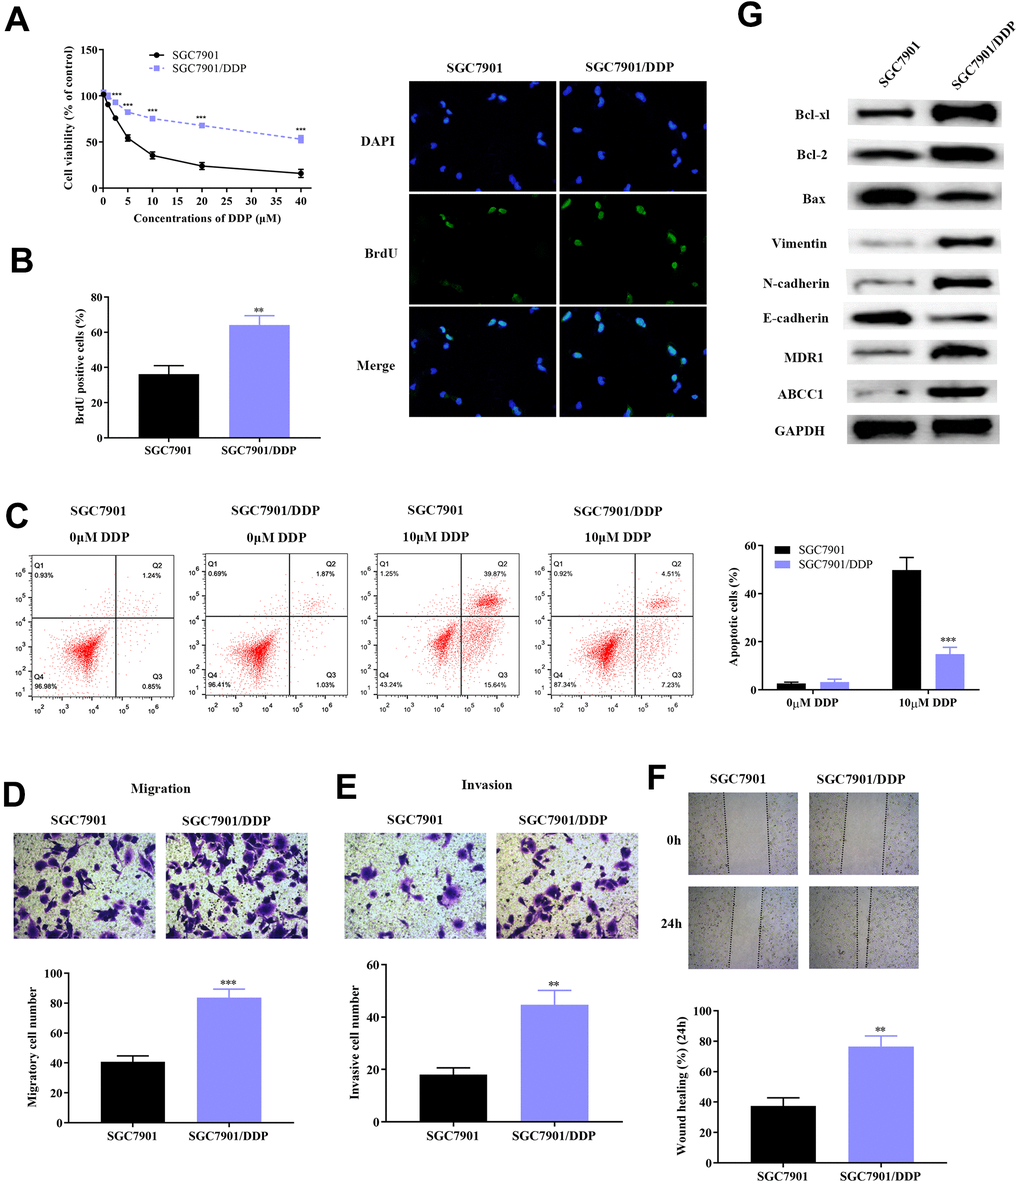 Construction of DDP-resistant GC cell line (SGC7901/DDP). (A) Cell viability assay demonstrated higher survival rate of SGC7901/DDP compared to normal SGC7901 cell line upon treatment with DDP. (B) BrdU assay showed that the DDP-resistant SGC7901 cell line had significantly higher survival rate compared to parental SGC7901. (C) Results from flow cytometry showed that the apoptotic rate of SGC7901/DDP cells was significantly lower compared to parental SGC7901. (D–E) Result of the transwell chamber assay indicated increased migration and invasion in SGC7901/DDP. (F) Result from the wound healing assay further verified the stronger invasive ability of SGC7901/DDP. (G) Result from western blot demonstrated lower apoptotic rate, stronger invasion and migration, increased drug resistance induced by higher expression of Bcl-2 family proteins, activation of EMT and overexpression of MDR1 and ABCC1 proteins, respectively. ***p